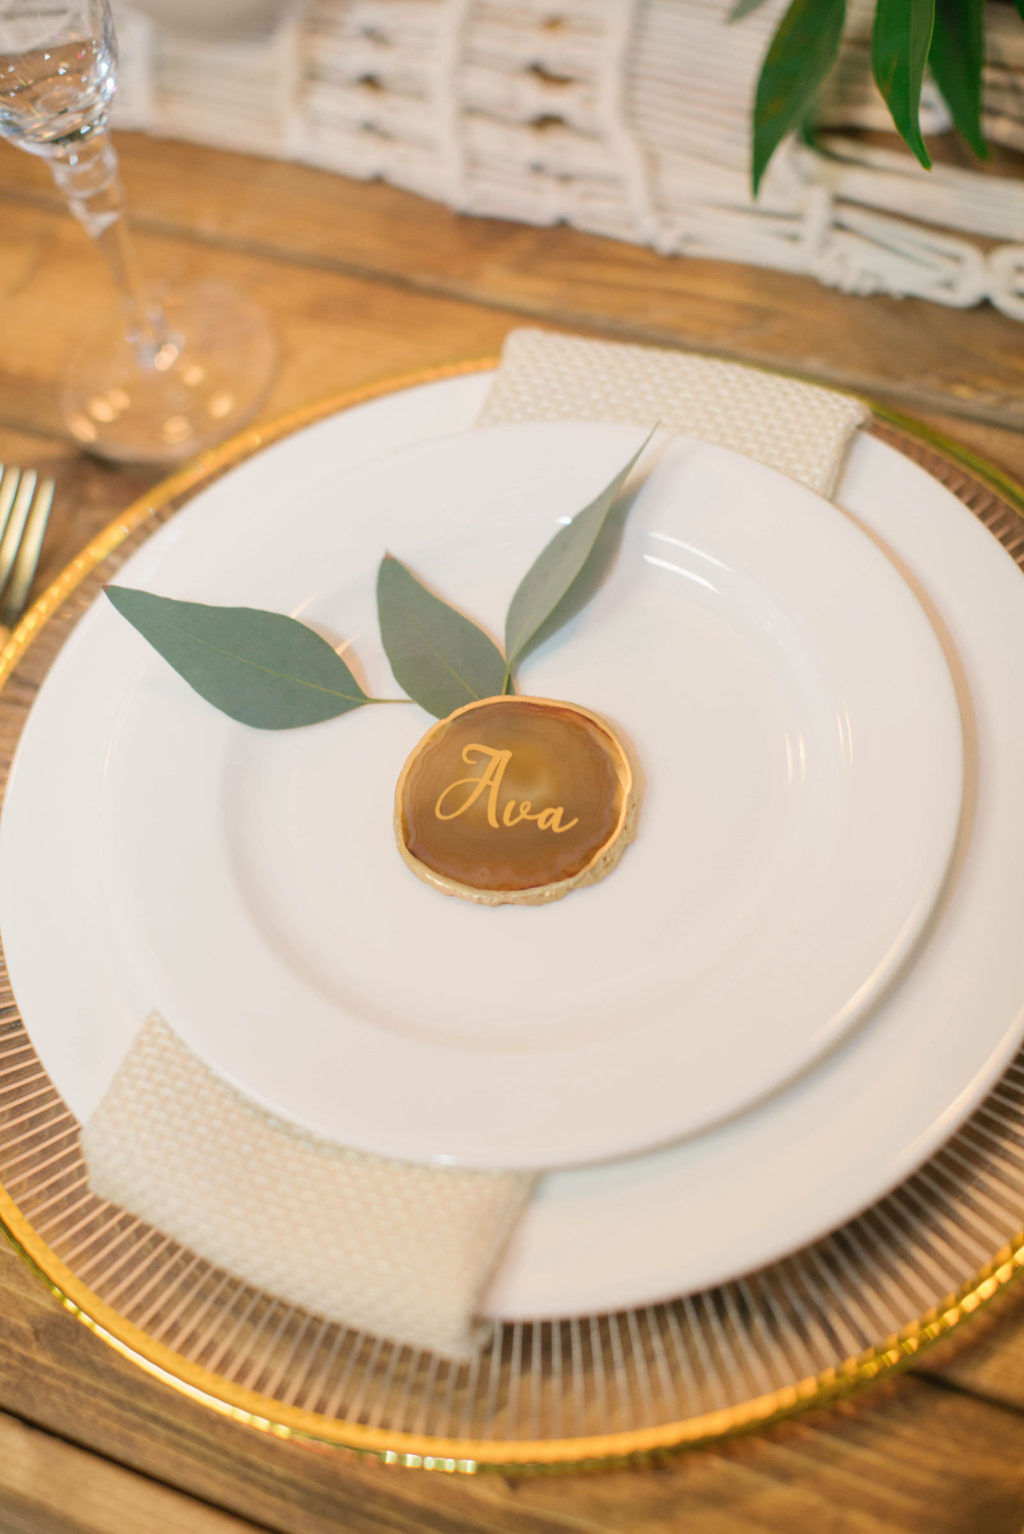 Boho Modern Gold and White Charger with Eucalyptus Greenery Name Card and Golf Flatware on Wooden Feasting Table | Reception Table Decor Ideas | Styled With Love at St. Pete Beach Wedding Venue Bellwether Beach Resort